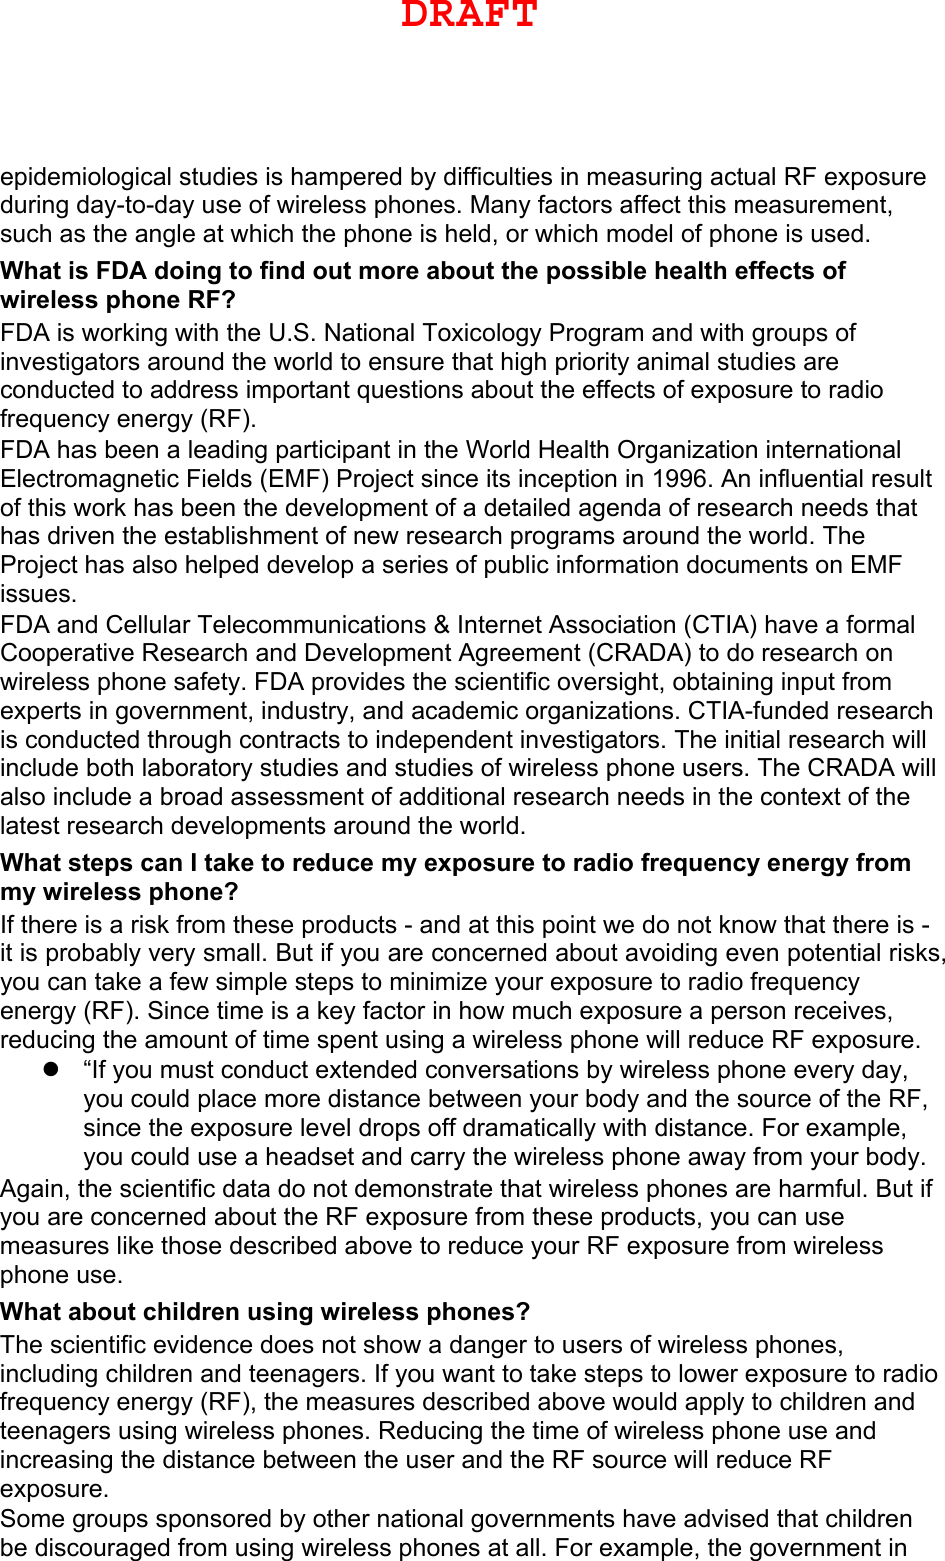 epidemiological studies is hampered by difficulties in measuring actual RF exposure during day-to-day use of wireless phones. Many factors affect this measurement, such as the angle at which the phone is held, or which model of phone is used. What is FDA doing to find out more about the possible health effects of wireless phone RF? FDA is working with the U.S. National Toxicology Program and with groups of investigators around the world to ensure that high priority animal studies are conducted to address important questions about the effects of exposure to radio frequency energy (RF). FDA has been a leading participant in the World Health Organization international Electromagnetic Fields (EMF) Project since its inception in 1996. An influential result of this work has been the development of a detailed agenda of research needs that has driven the establishment of new research programs around the world. The Project has also helped develop a series of public information documents on EMF issues. FDA and Cellular Telecommunications &amp; Internet Association (CTIA) have a formal Cooperative Research and Development Agreement (CRADA) to do research on wireless phone safety. FDA provides the scientific oversight, obtaining input from experts in government, industry, and academic organizations. CTIA-funded research is conducted through contracts to independent investigators. The initial research will include both laboratory studies and studies of wireless phone users. The CRADA will also include a broad assessment of additional research needs in the context of the latest research developments around the world. What steps can I take to reduce my exposure to radio frequency energy from my wireless phone? If there is a risk from these products - and at this point we do not know that there is - it is probably very small. But if you are concerned about avoiding even potential risks, you can take a few simple steps to minimize your exposure to radio frequency energy (RF). Since time is a key factor in how much exposure a person receives, reducing the amount of time spent using a wireless phone will reduce RF exposure. “If you must conduct extended conversations by wireless phone every day,you could place more distance between your body and the source of the RF,since the exposure level drops off dramatically with distance. For example,you could use a headset and carry the wireless phone away from your body.Again, the scientific data do not demonstrate that wireless phones are harmful. But if you are concerned about the RF exposure from these products, you can use measures like those described above to reduce your RF exposure from wireless phone use. What about children using wireless phones? The scientific evidence does not show a danger to users of wireless phones, including children and teenagers. If you want to take steps to lower exposure to radio frequency energy (RF), the measures described above would apply to children and teenagers using wireless phones. Reducing the time of wireless phone use and increasing the distance between the user and the RF source will reduce RF exposure. Some groups sponsored by other national governments have advised that children be discouraged from using wireless phones at all. For example, the government in DRAFT